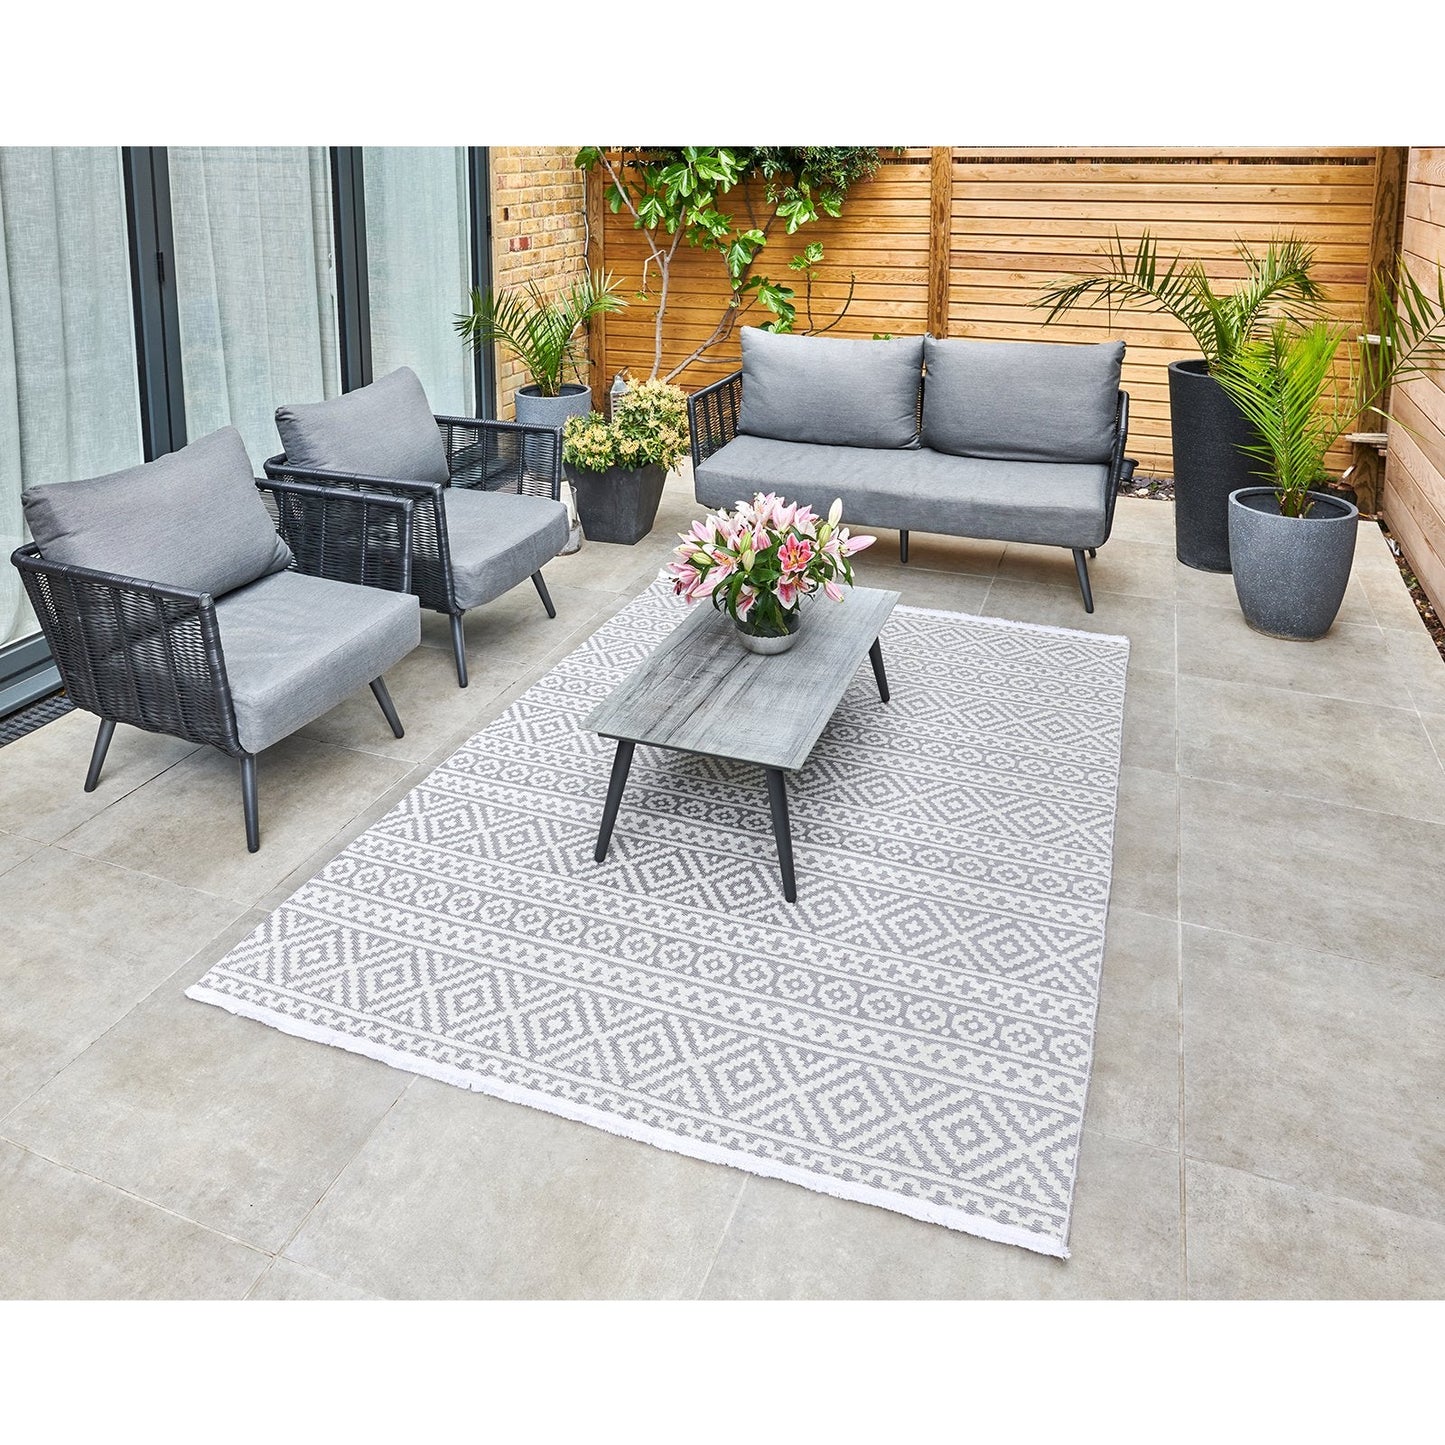 Jazz Silver Patterned Outdoor Rug